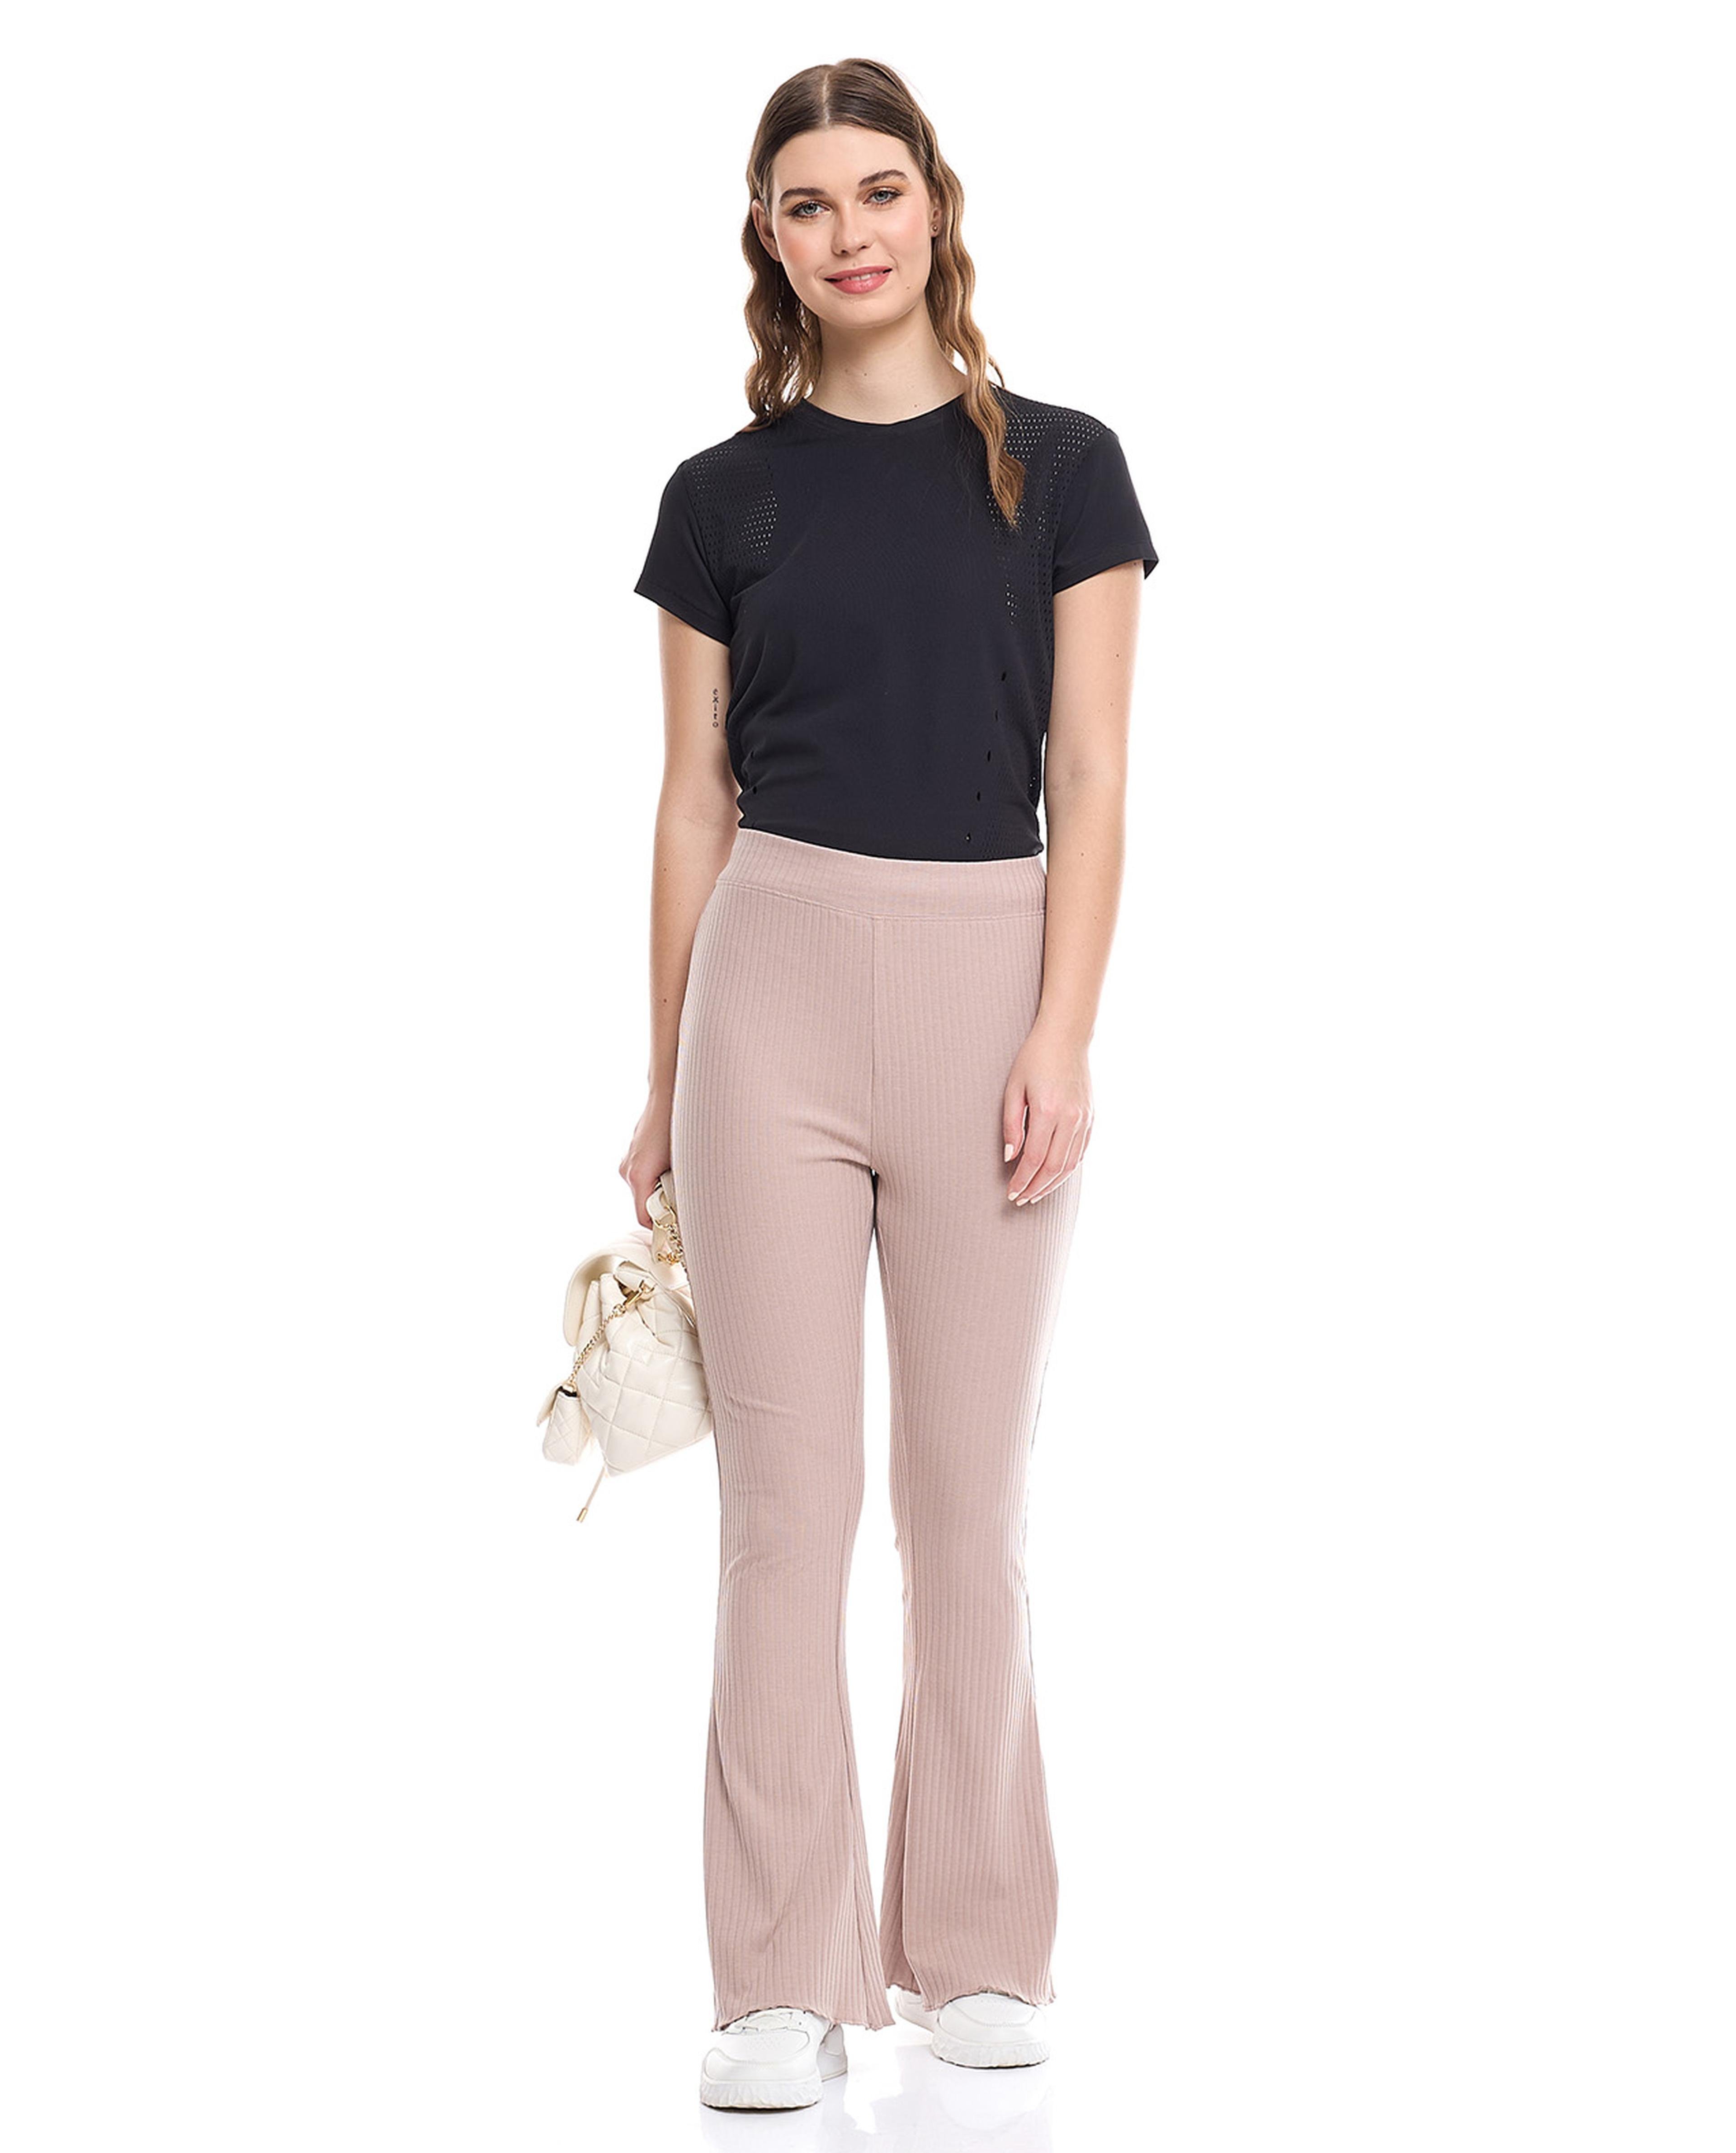 Ribbed Flared Pants with Elastic Waist